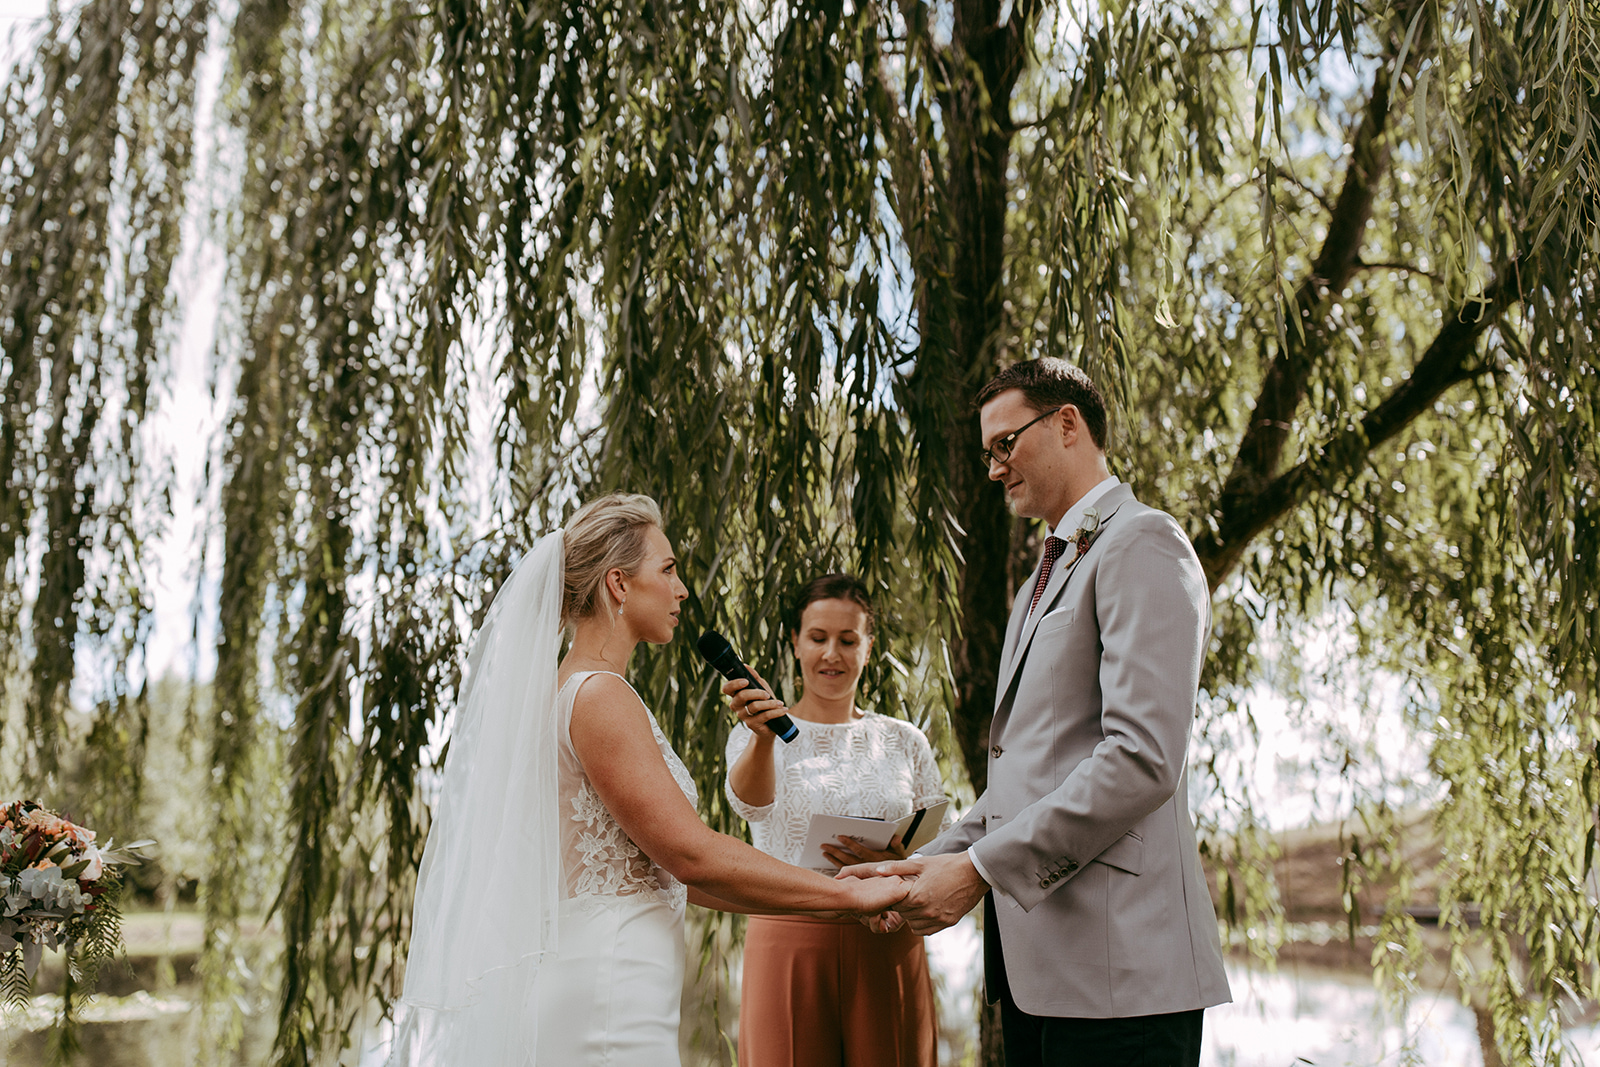 Bride and groom exchanging wedding vows under willow tree